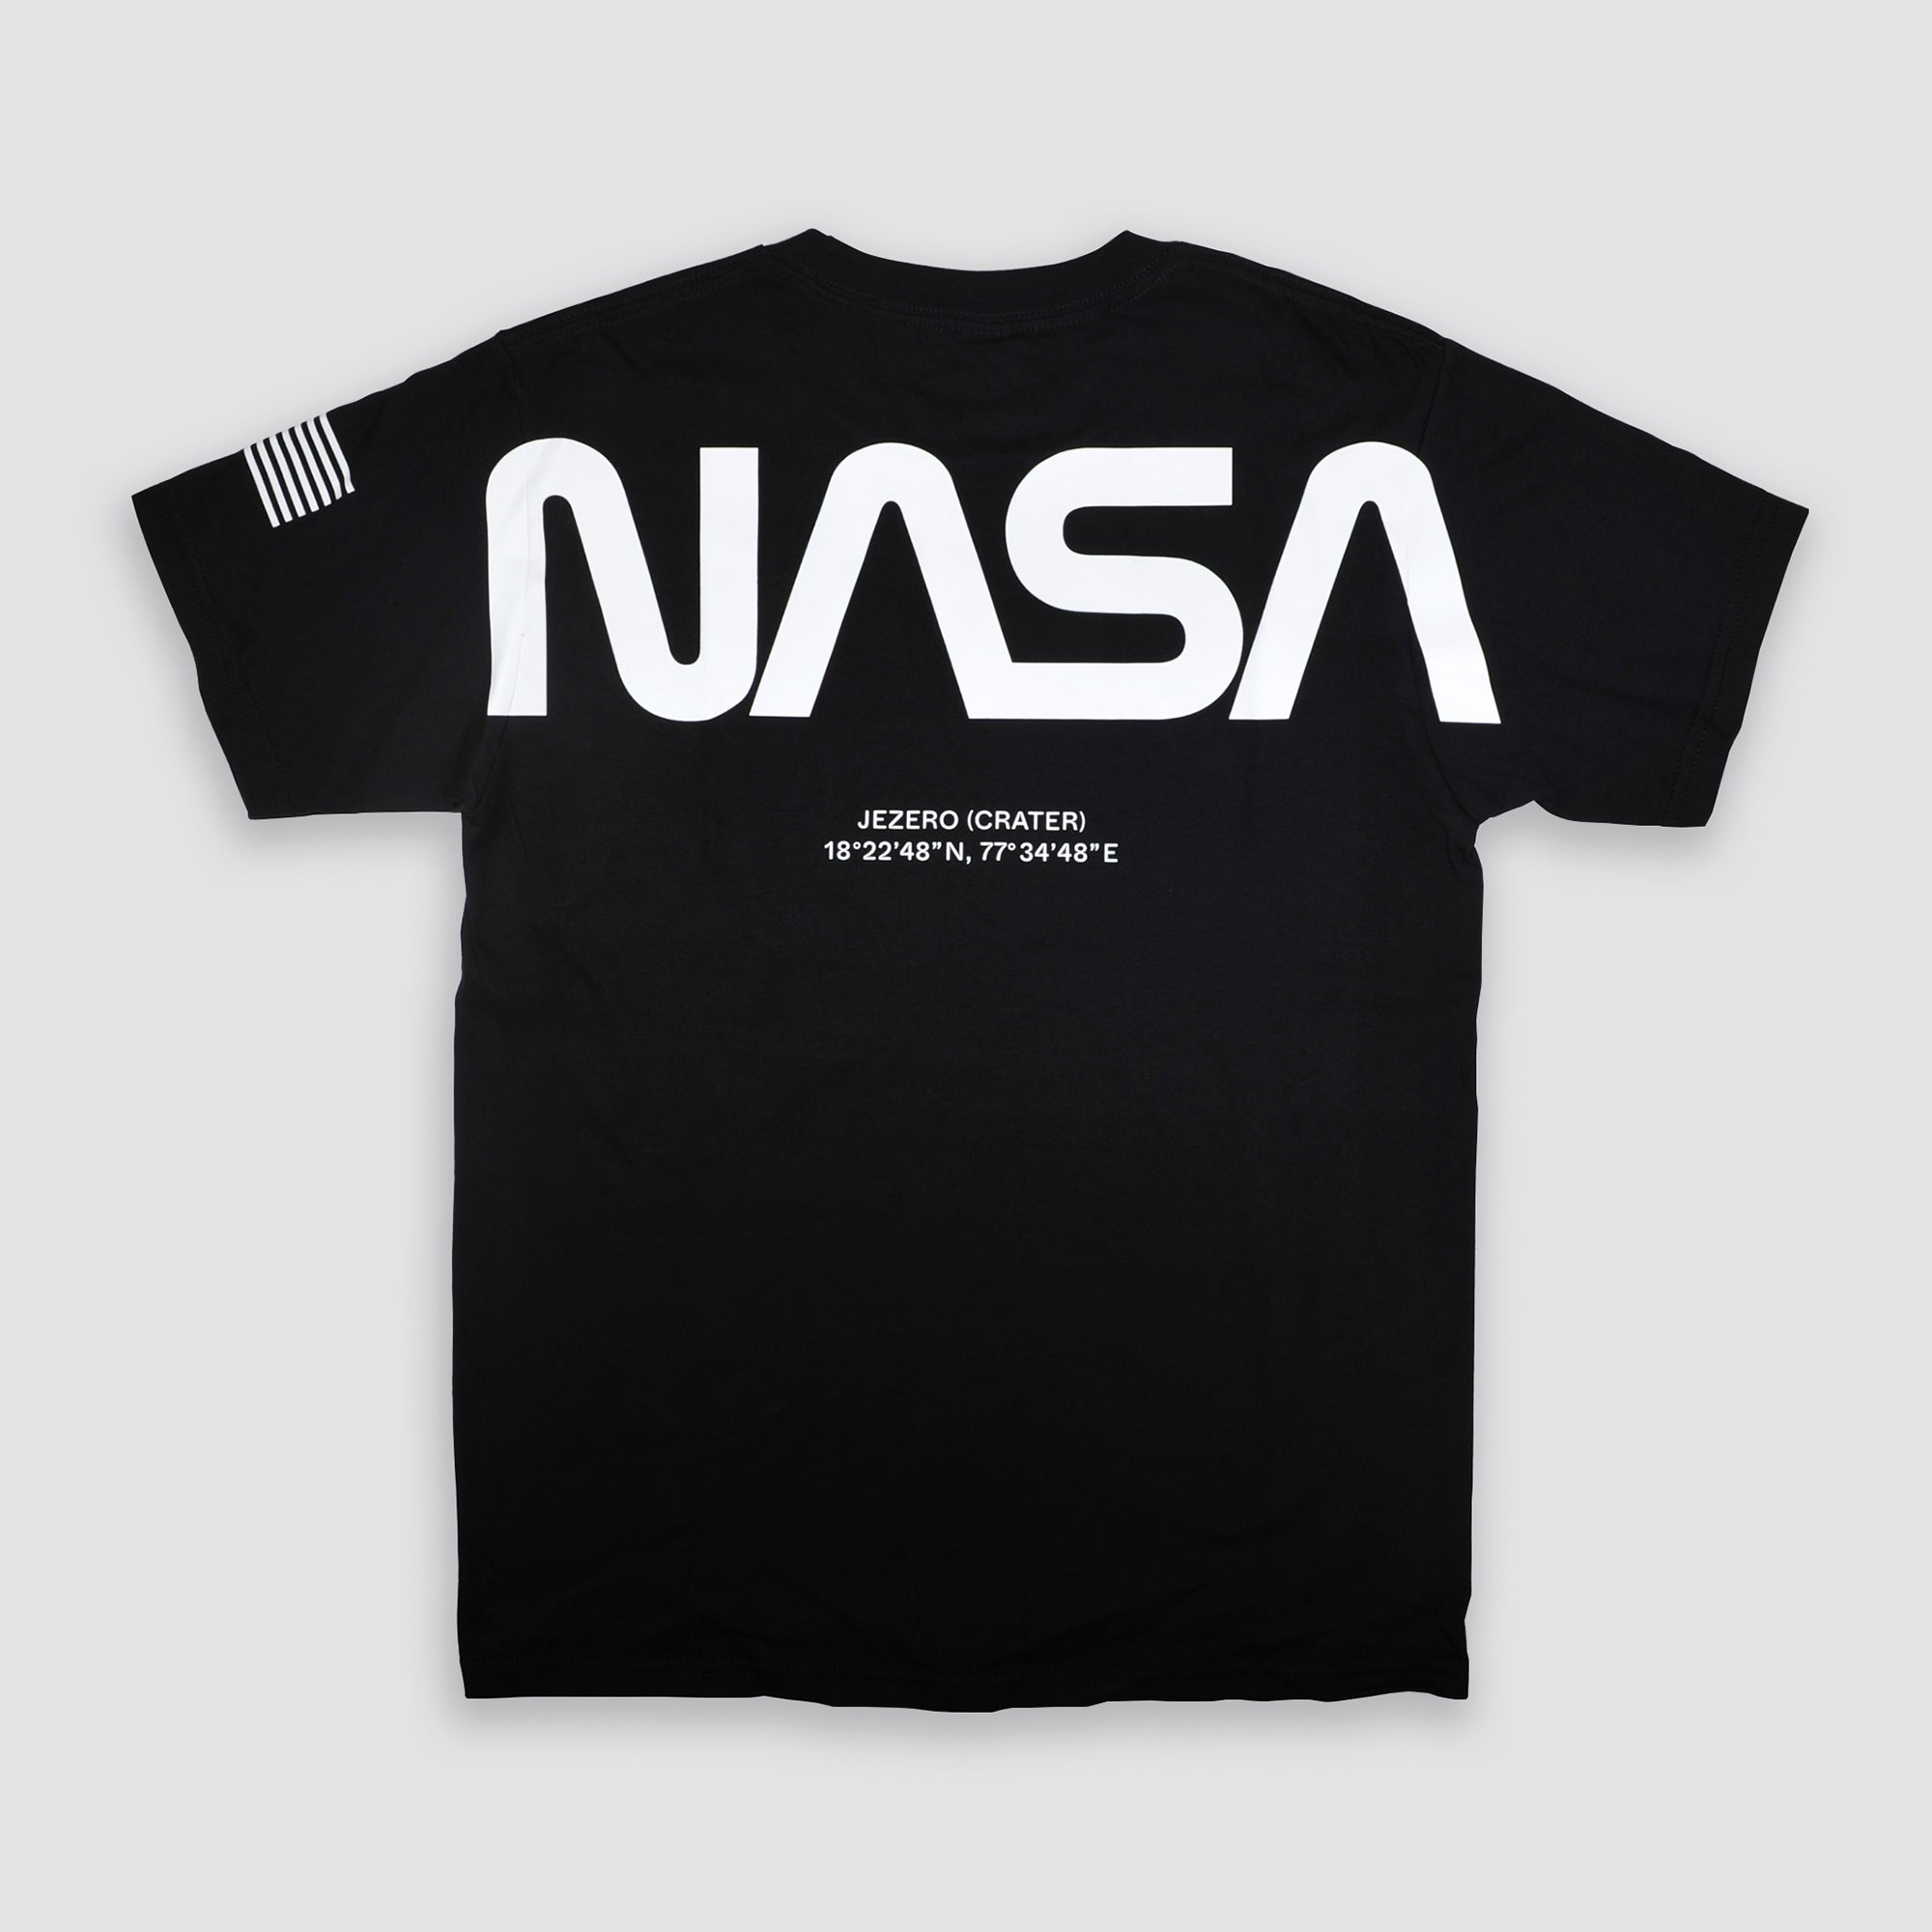 Limited MARS MISSION heavyweight T-shirt with extra large NASA logo print. The garment is knit from 100% American cotton (6oz) with premium comfort and better fit.